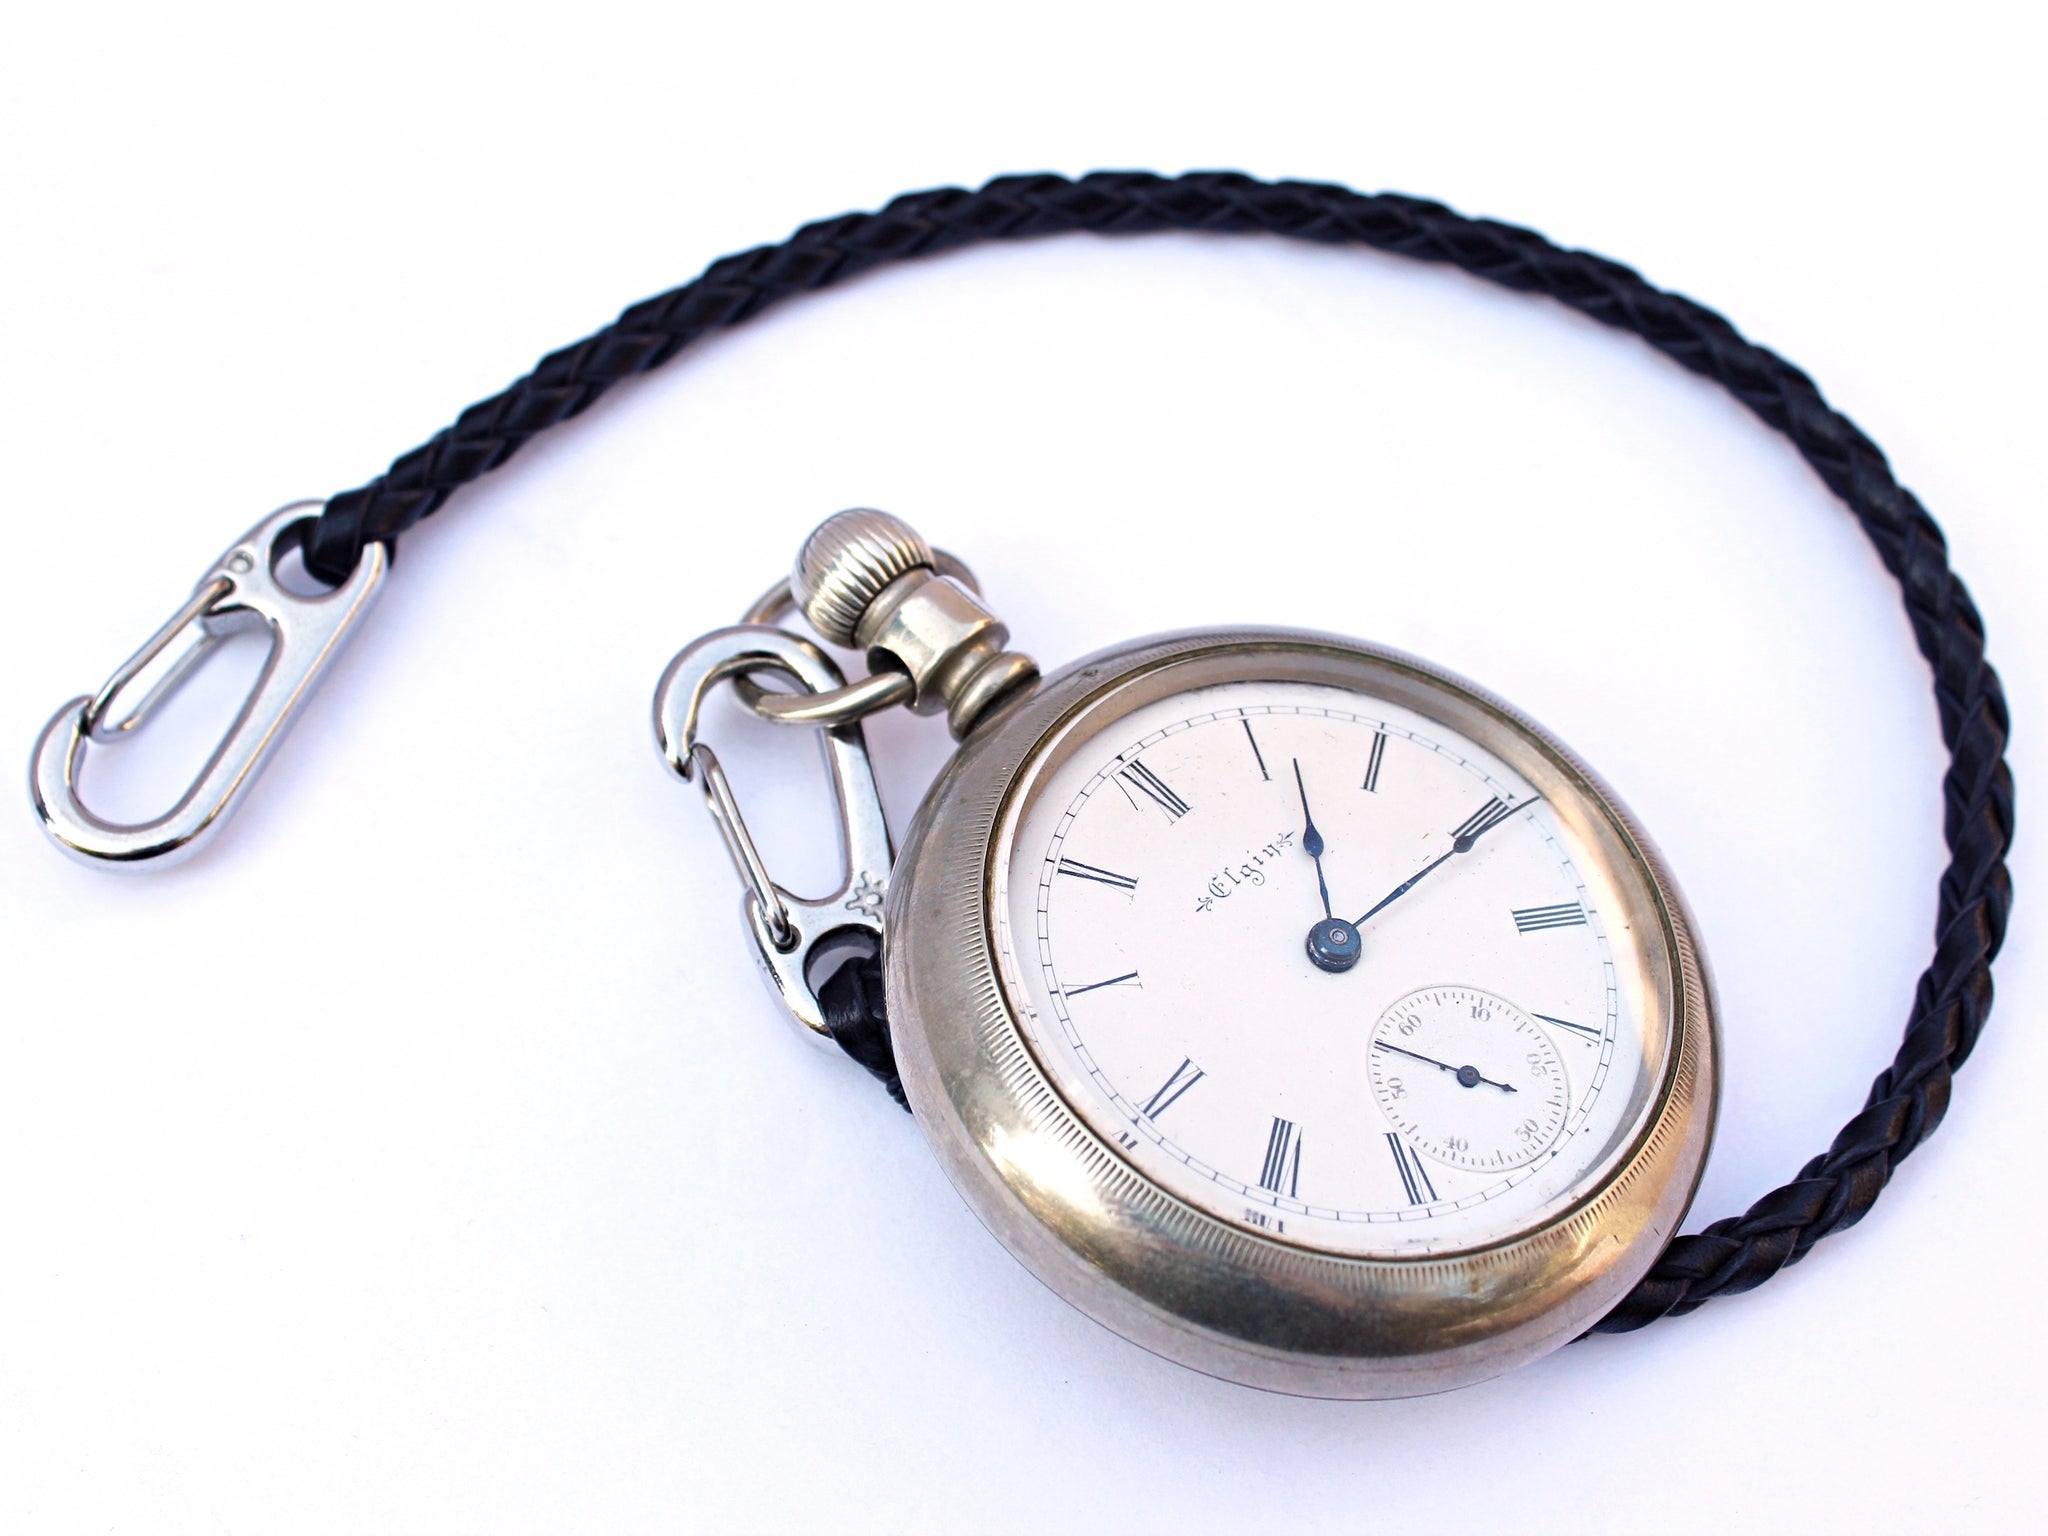 Braided Leather Pocket Watch Chain by San Filippo Leather